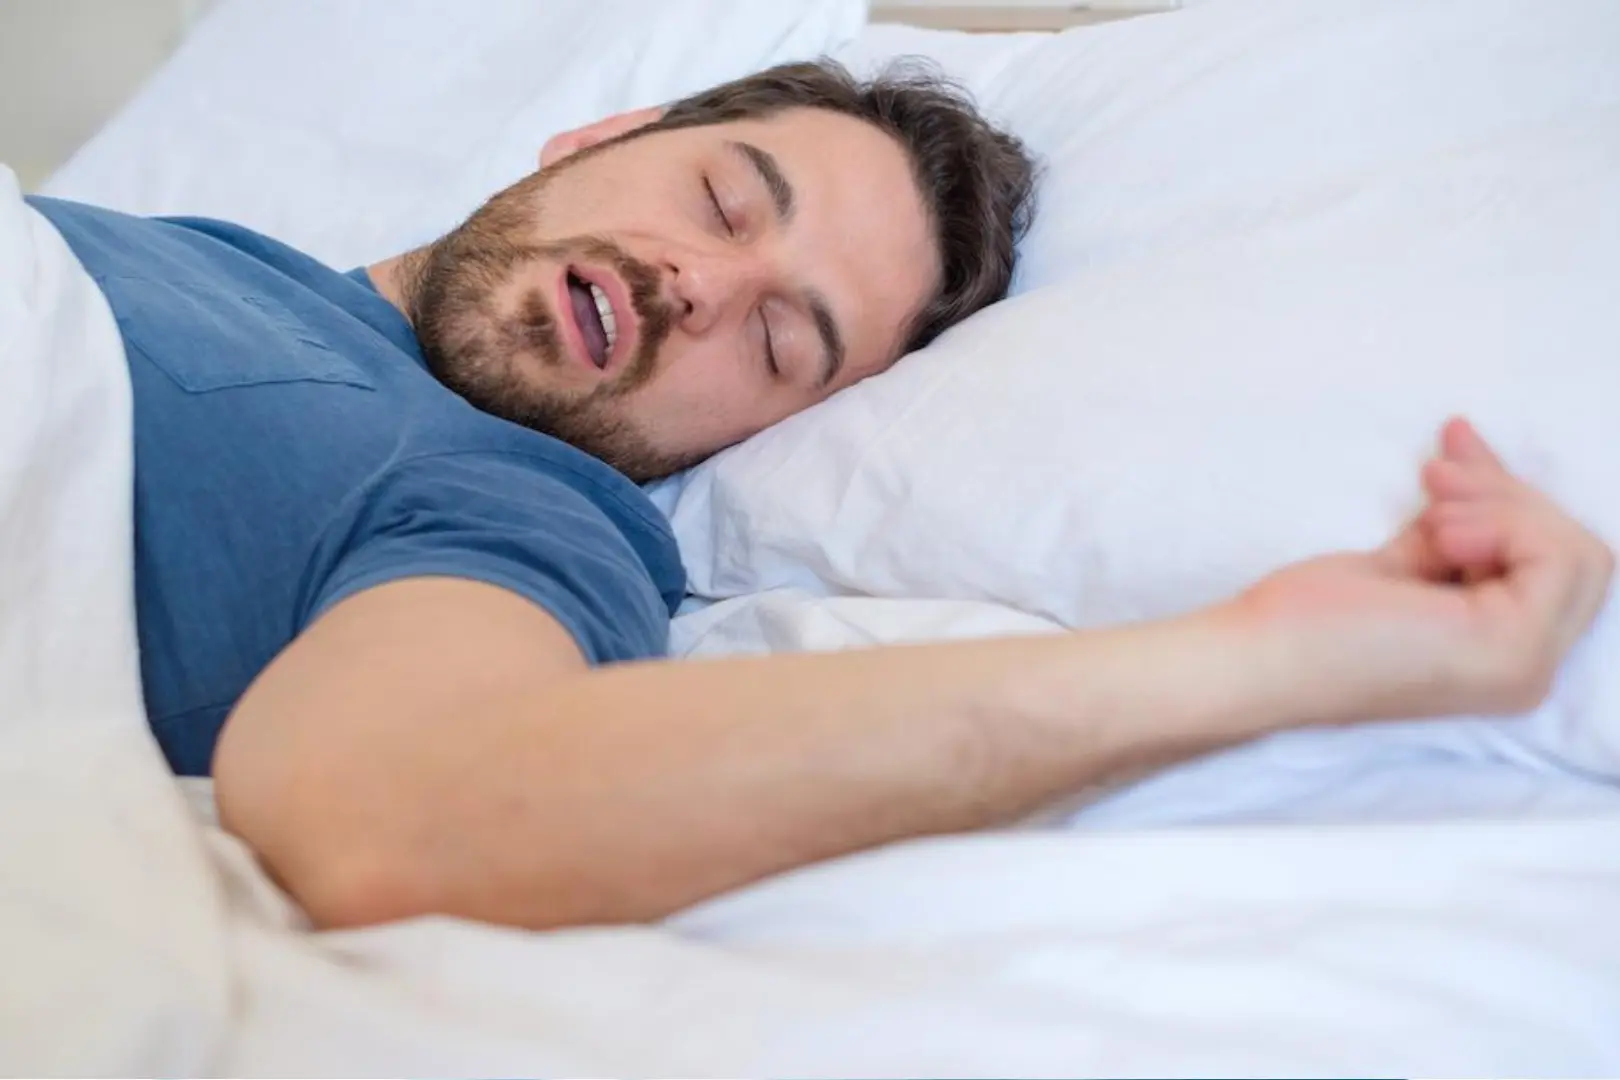 A man sleeping on a white bed wearing a blue tshirt